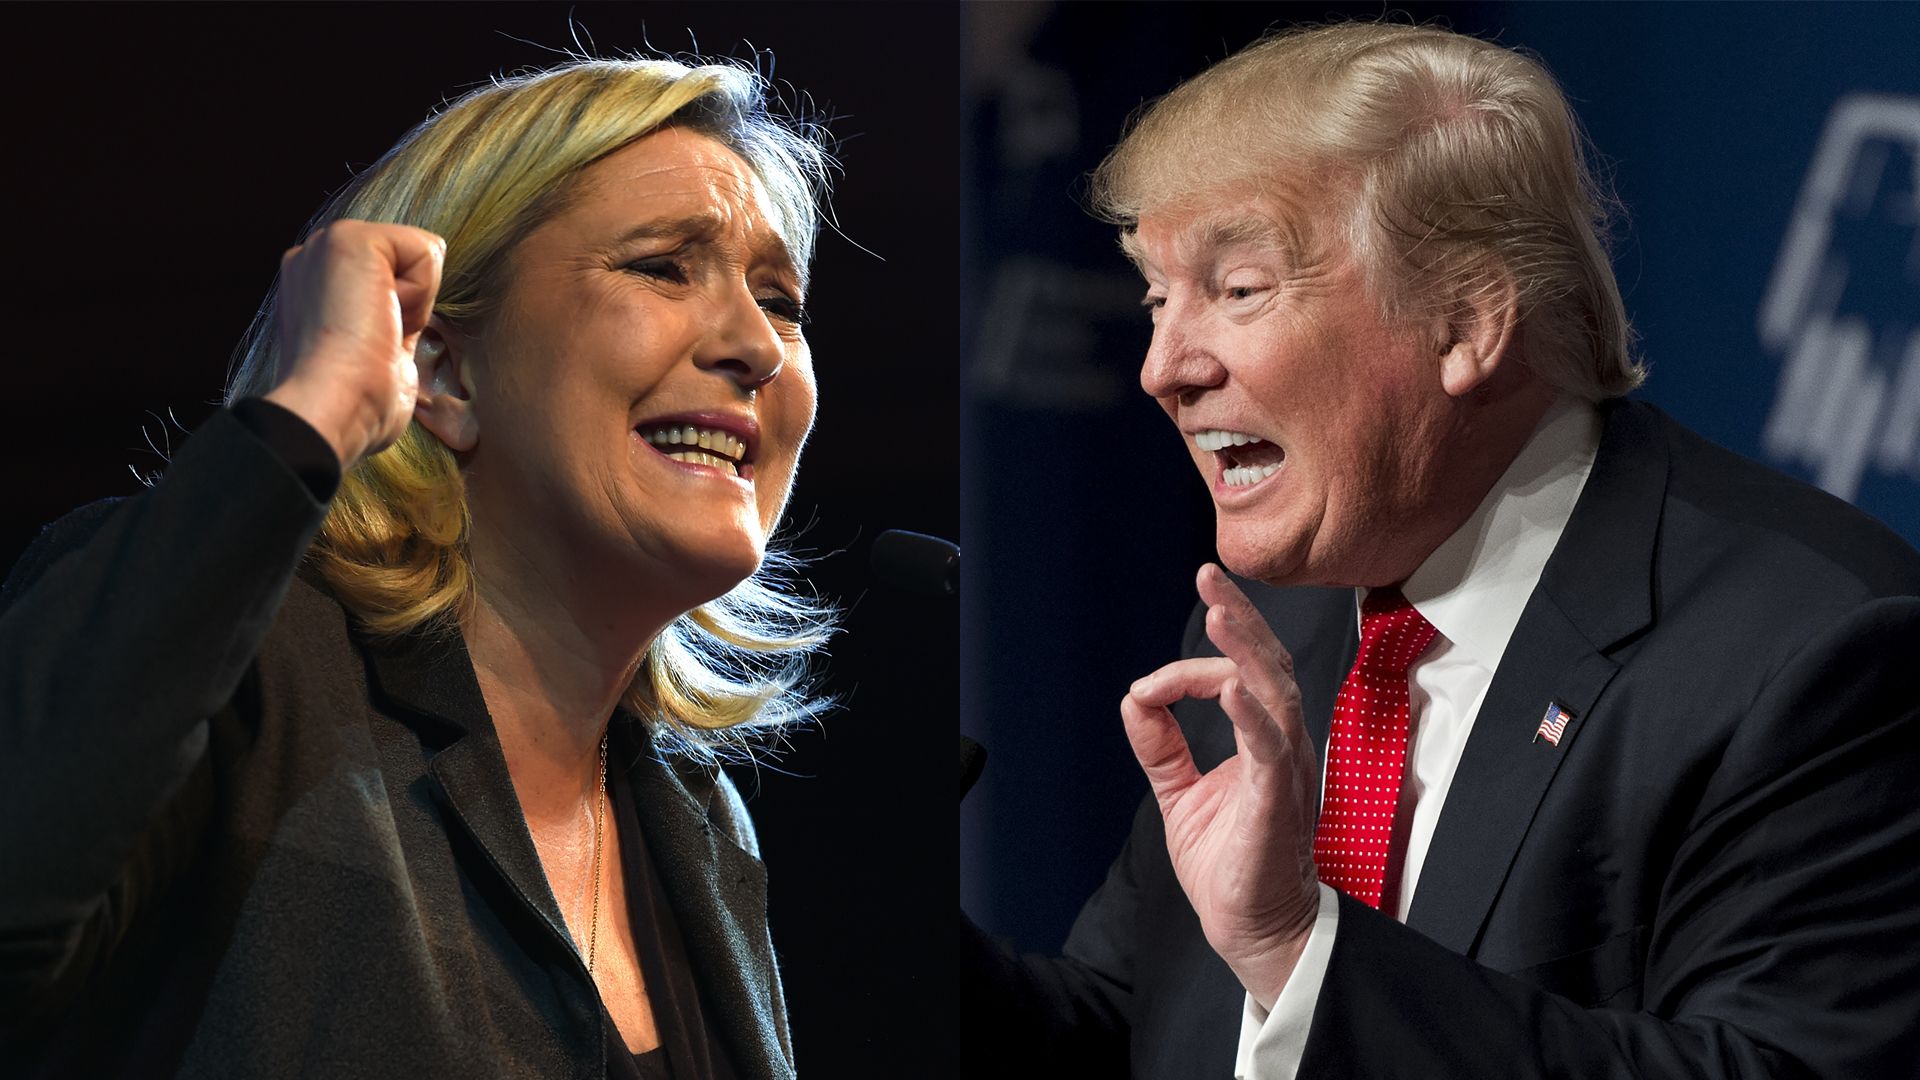 Marine Le Pen Is Donald Trump Without the Crazy – Foreign Policy